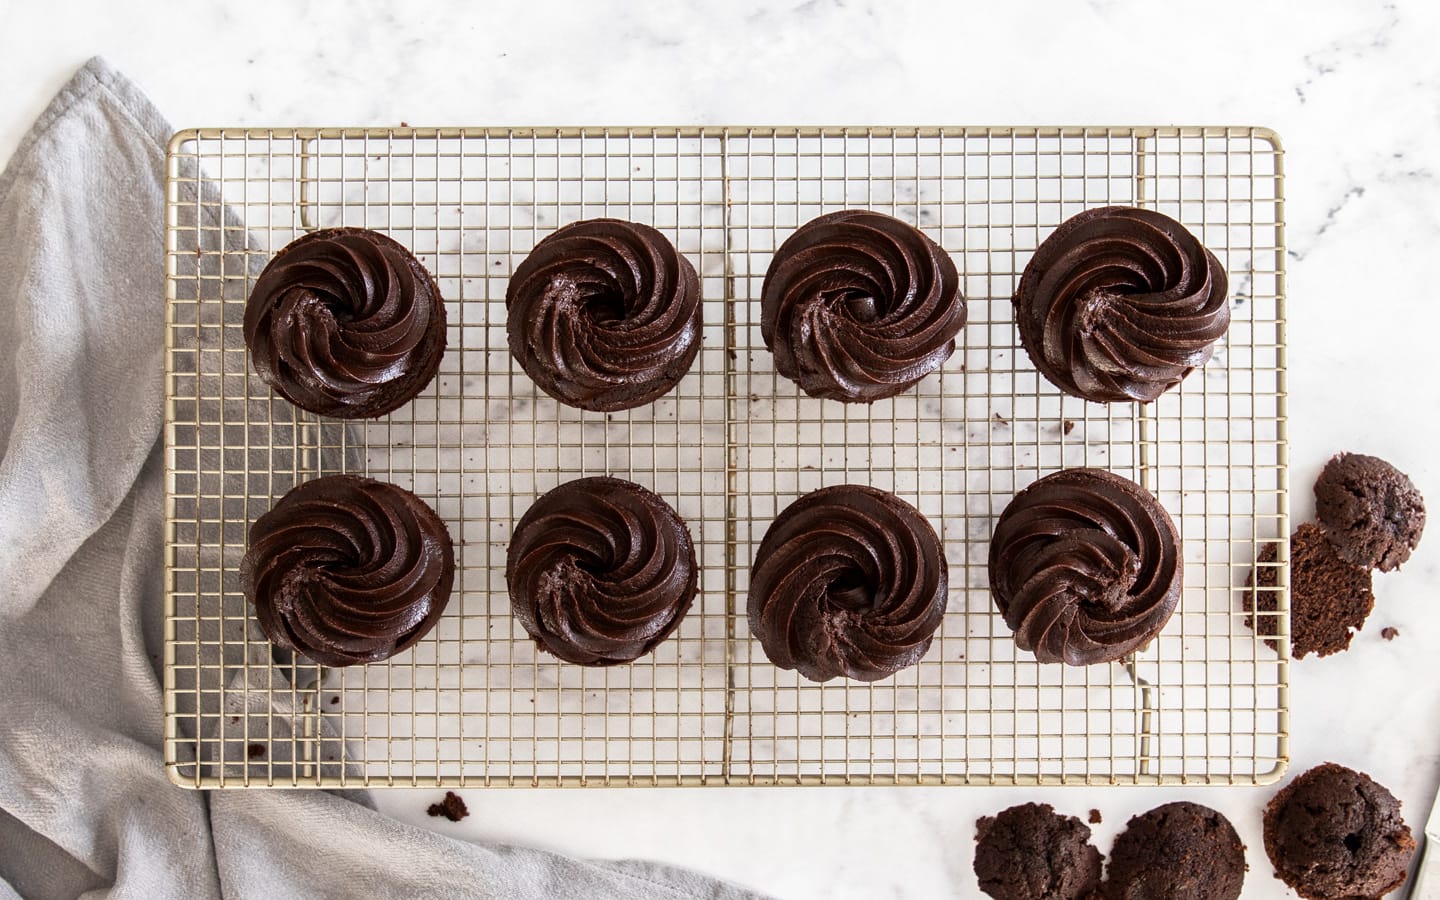 Mini cakes topped with a swirl of chocolate fudge frosting.